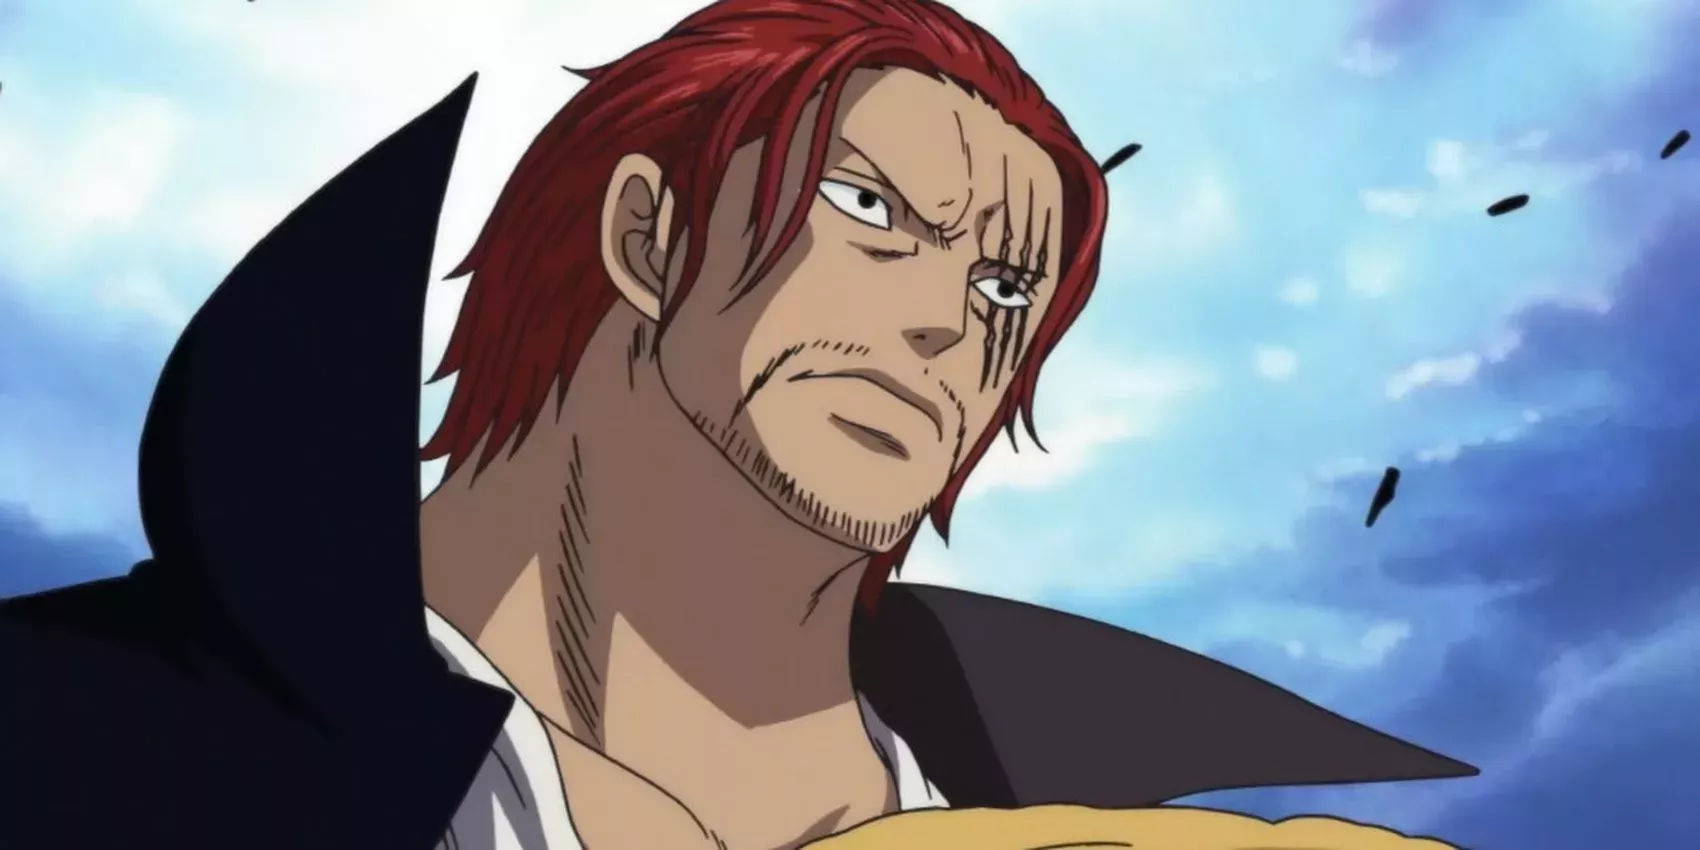 shanks in one piece looks serious with a high collared cloak.